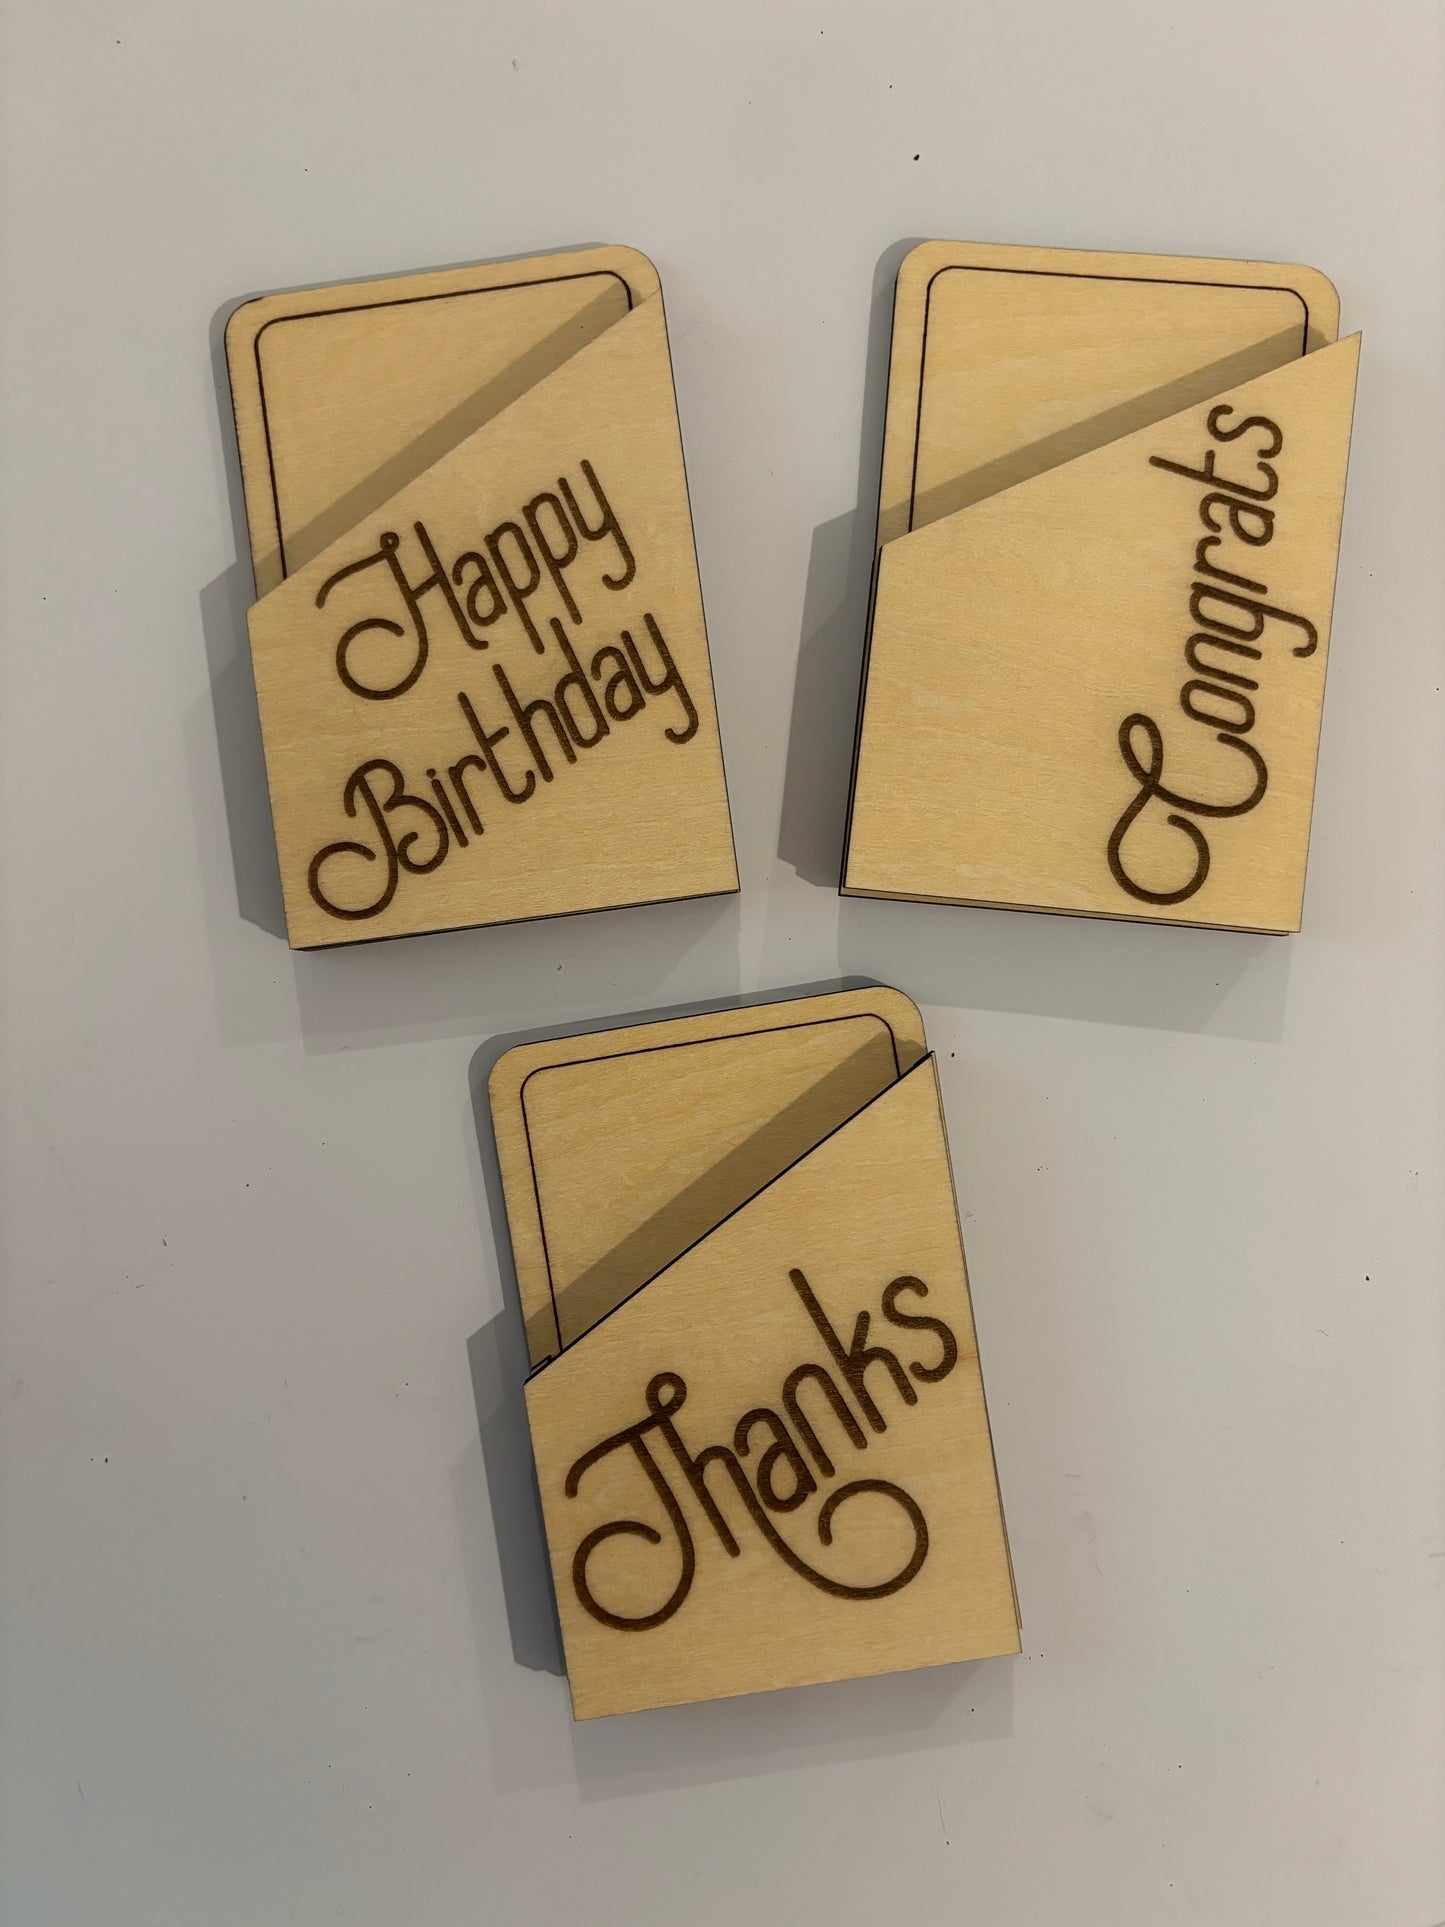 Gift Card Holders - Any occassion